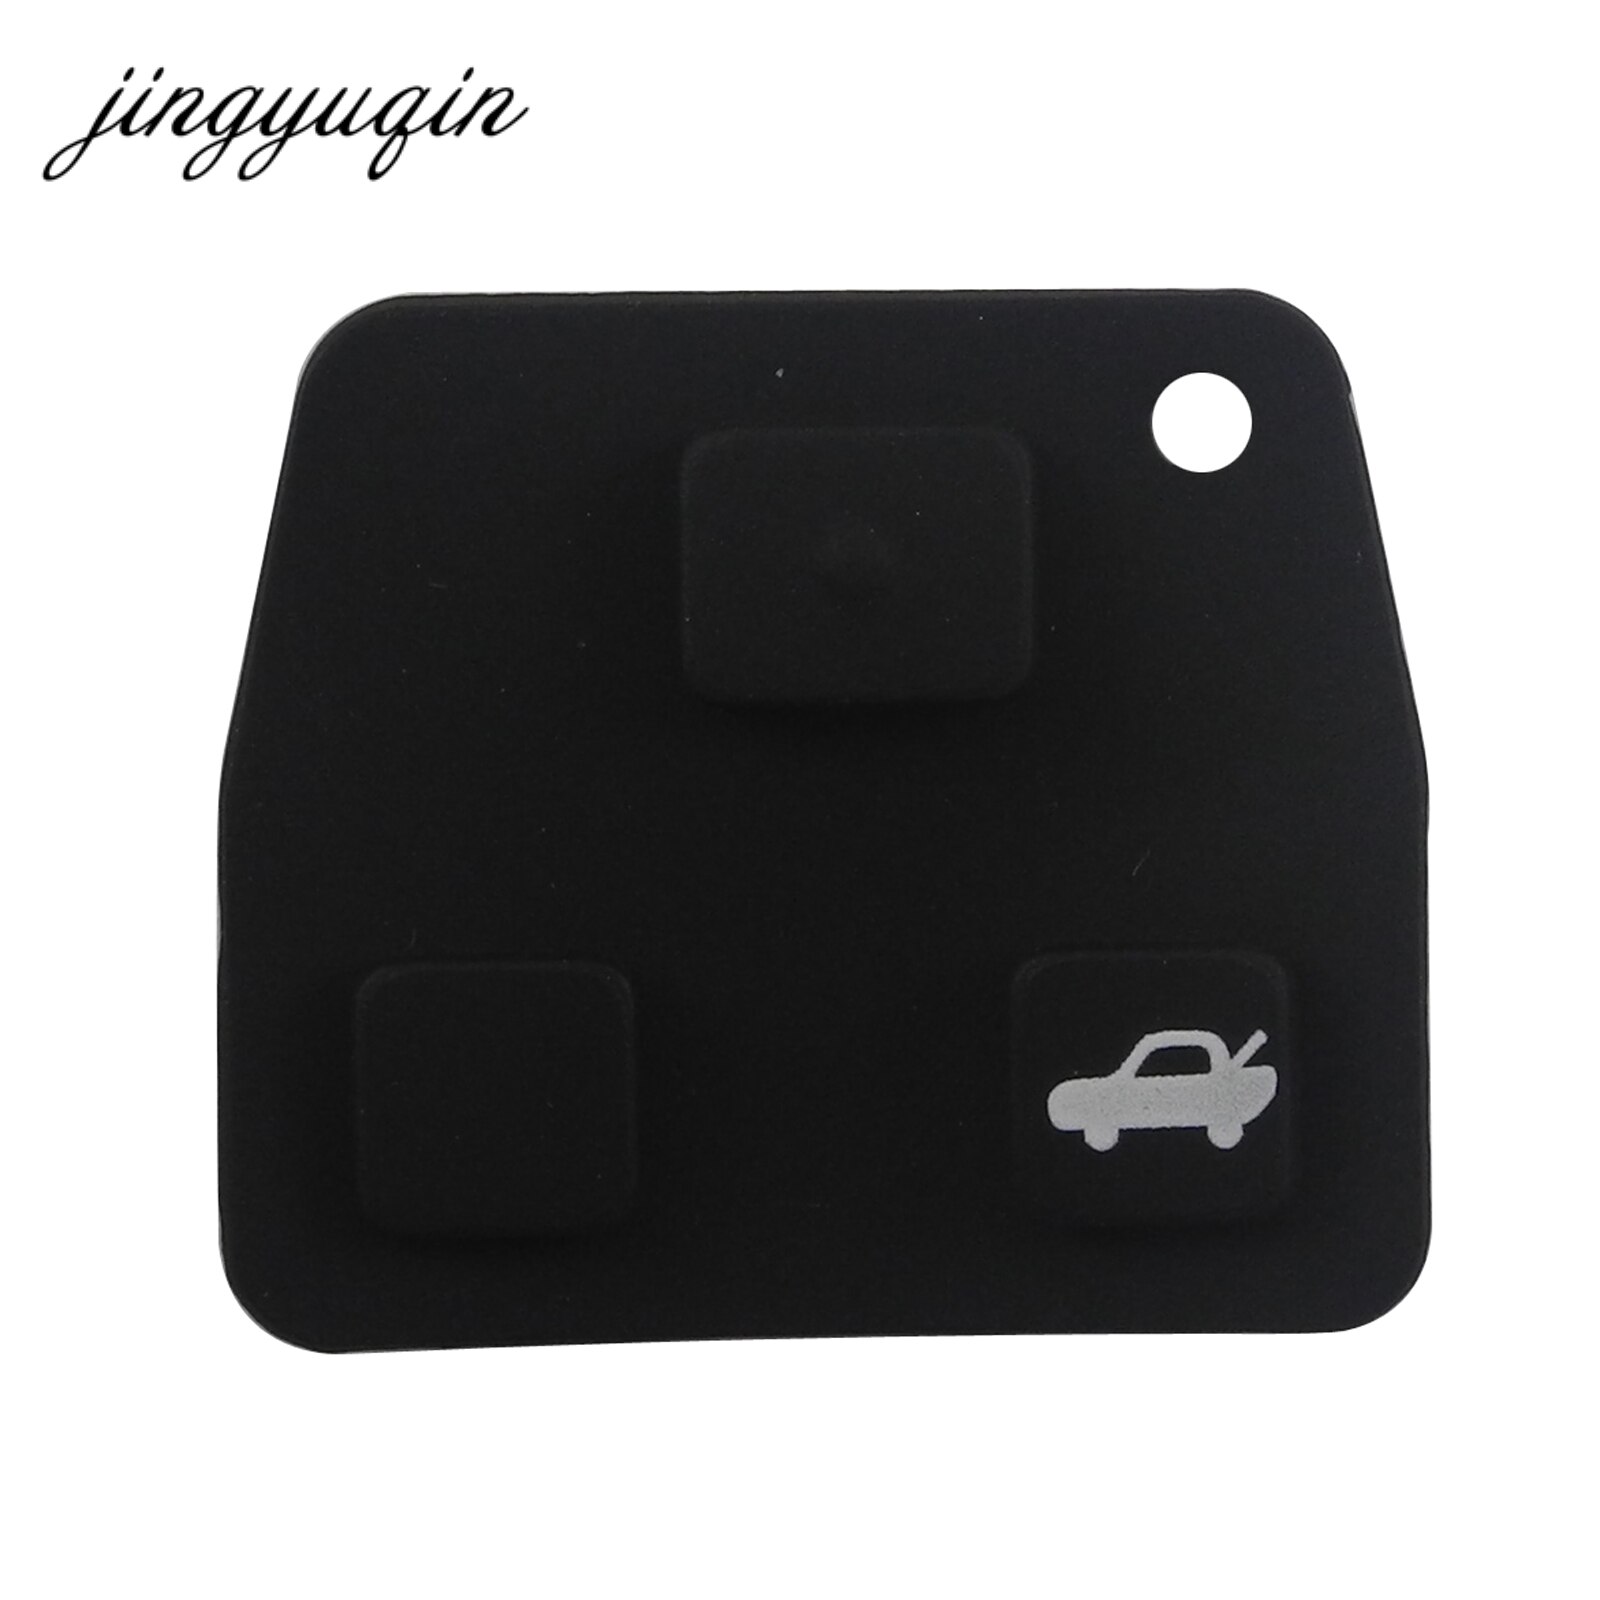 Jingyuqin 20 Stks/partij Vervanging Voor Toyota Afstandsbediening Sleutel Pad Silicon Rubber Pad 2/3 Knop Voor Lexus Afstandsbediening Sleutel pad